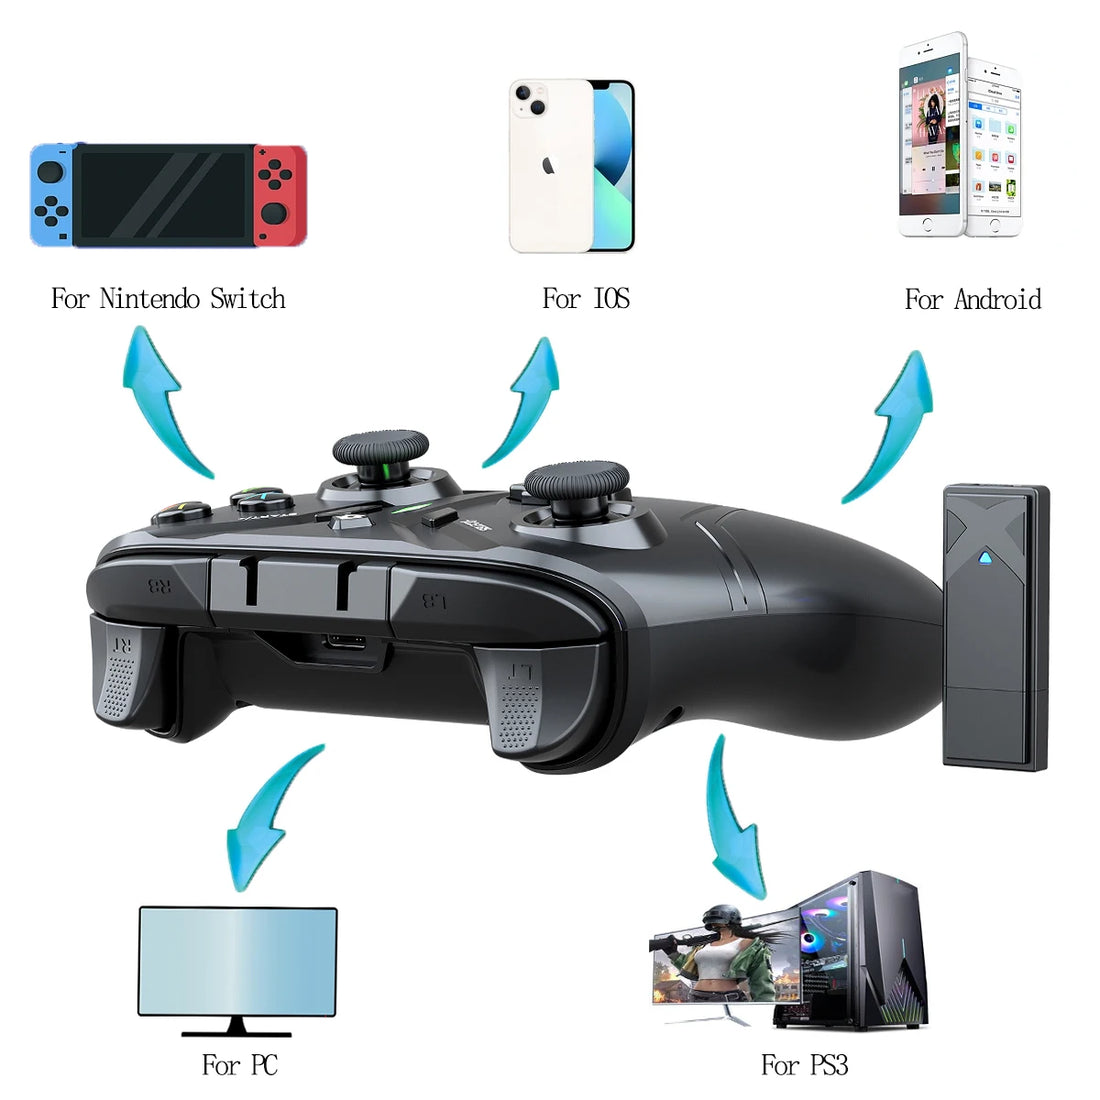 For Bluetooth/2.4G wireless controller For Switch/PC/Steam/PS3/Android TV Box Smart Phone Tablet Joystick Game Gamepad